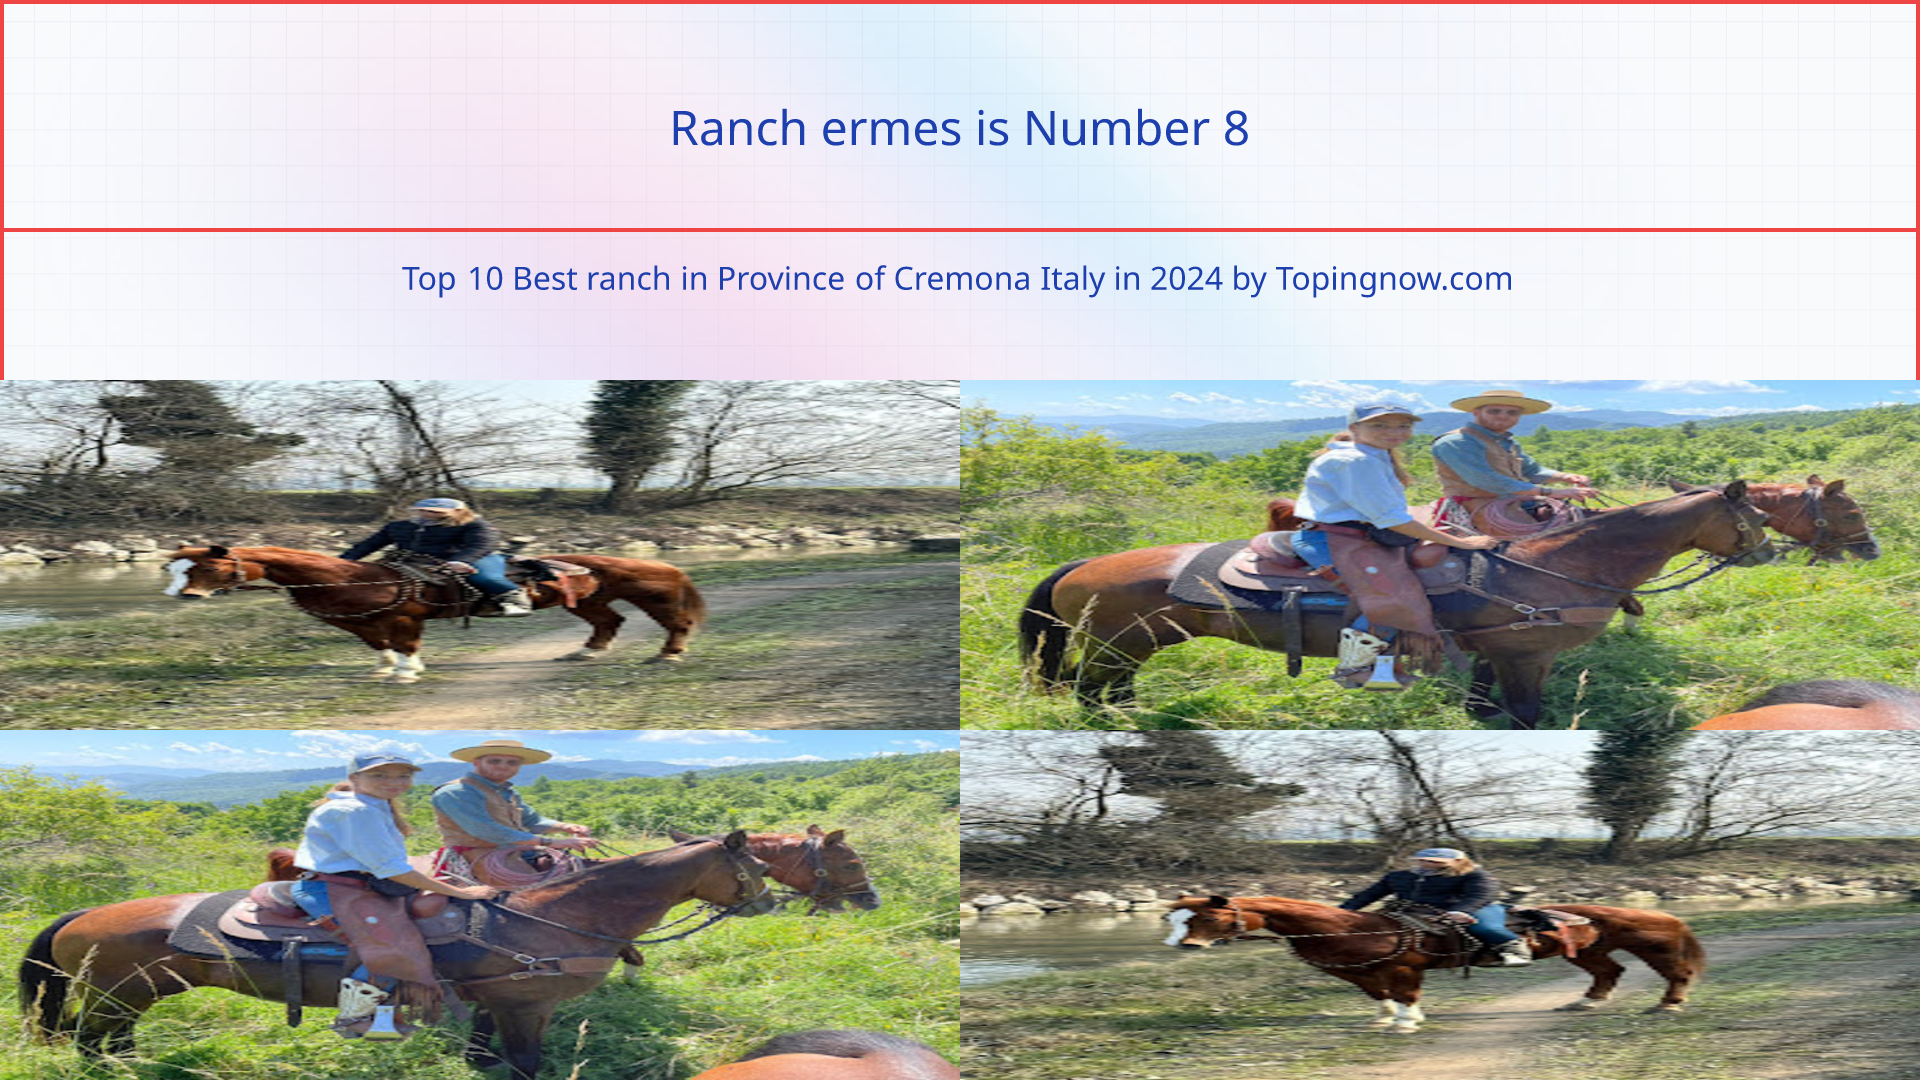 Ranch ermes: Top 10 Best ranch in Province of Cremona Italy in 2024